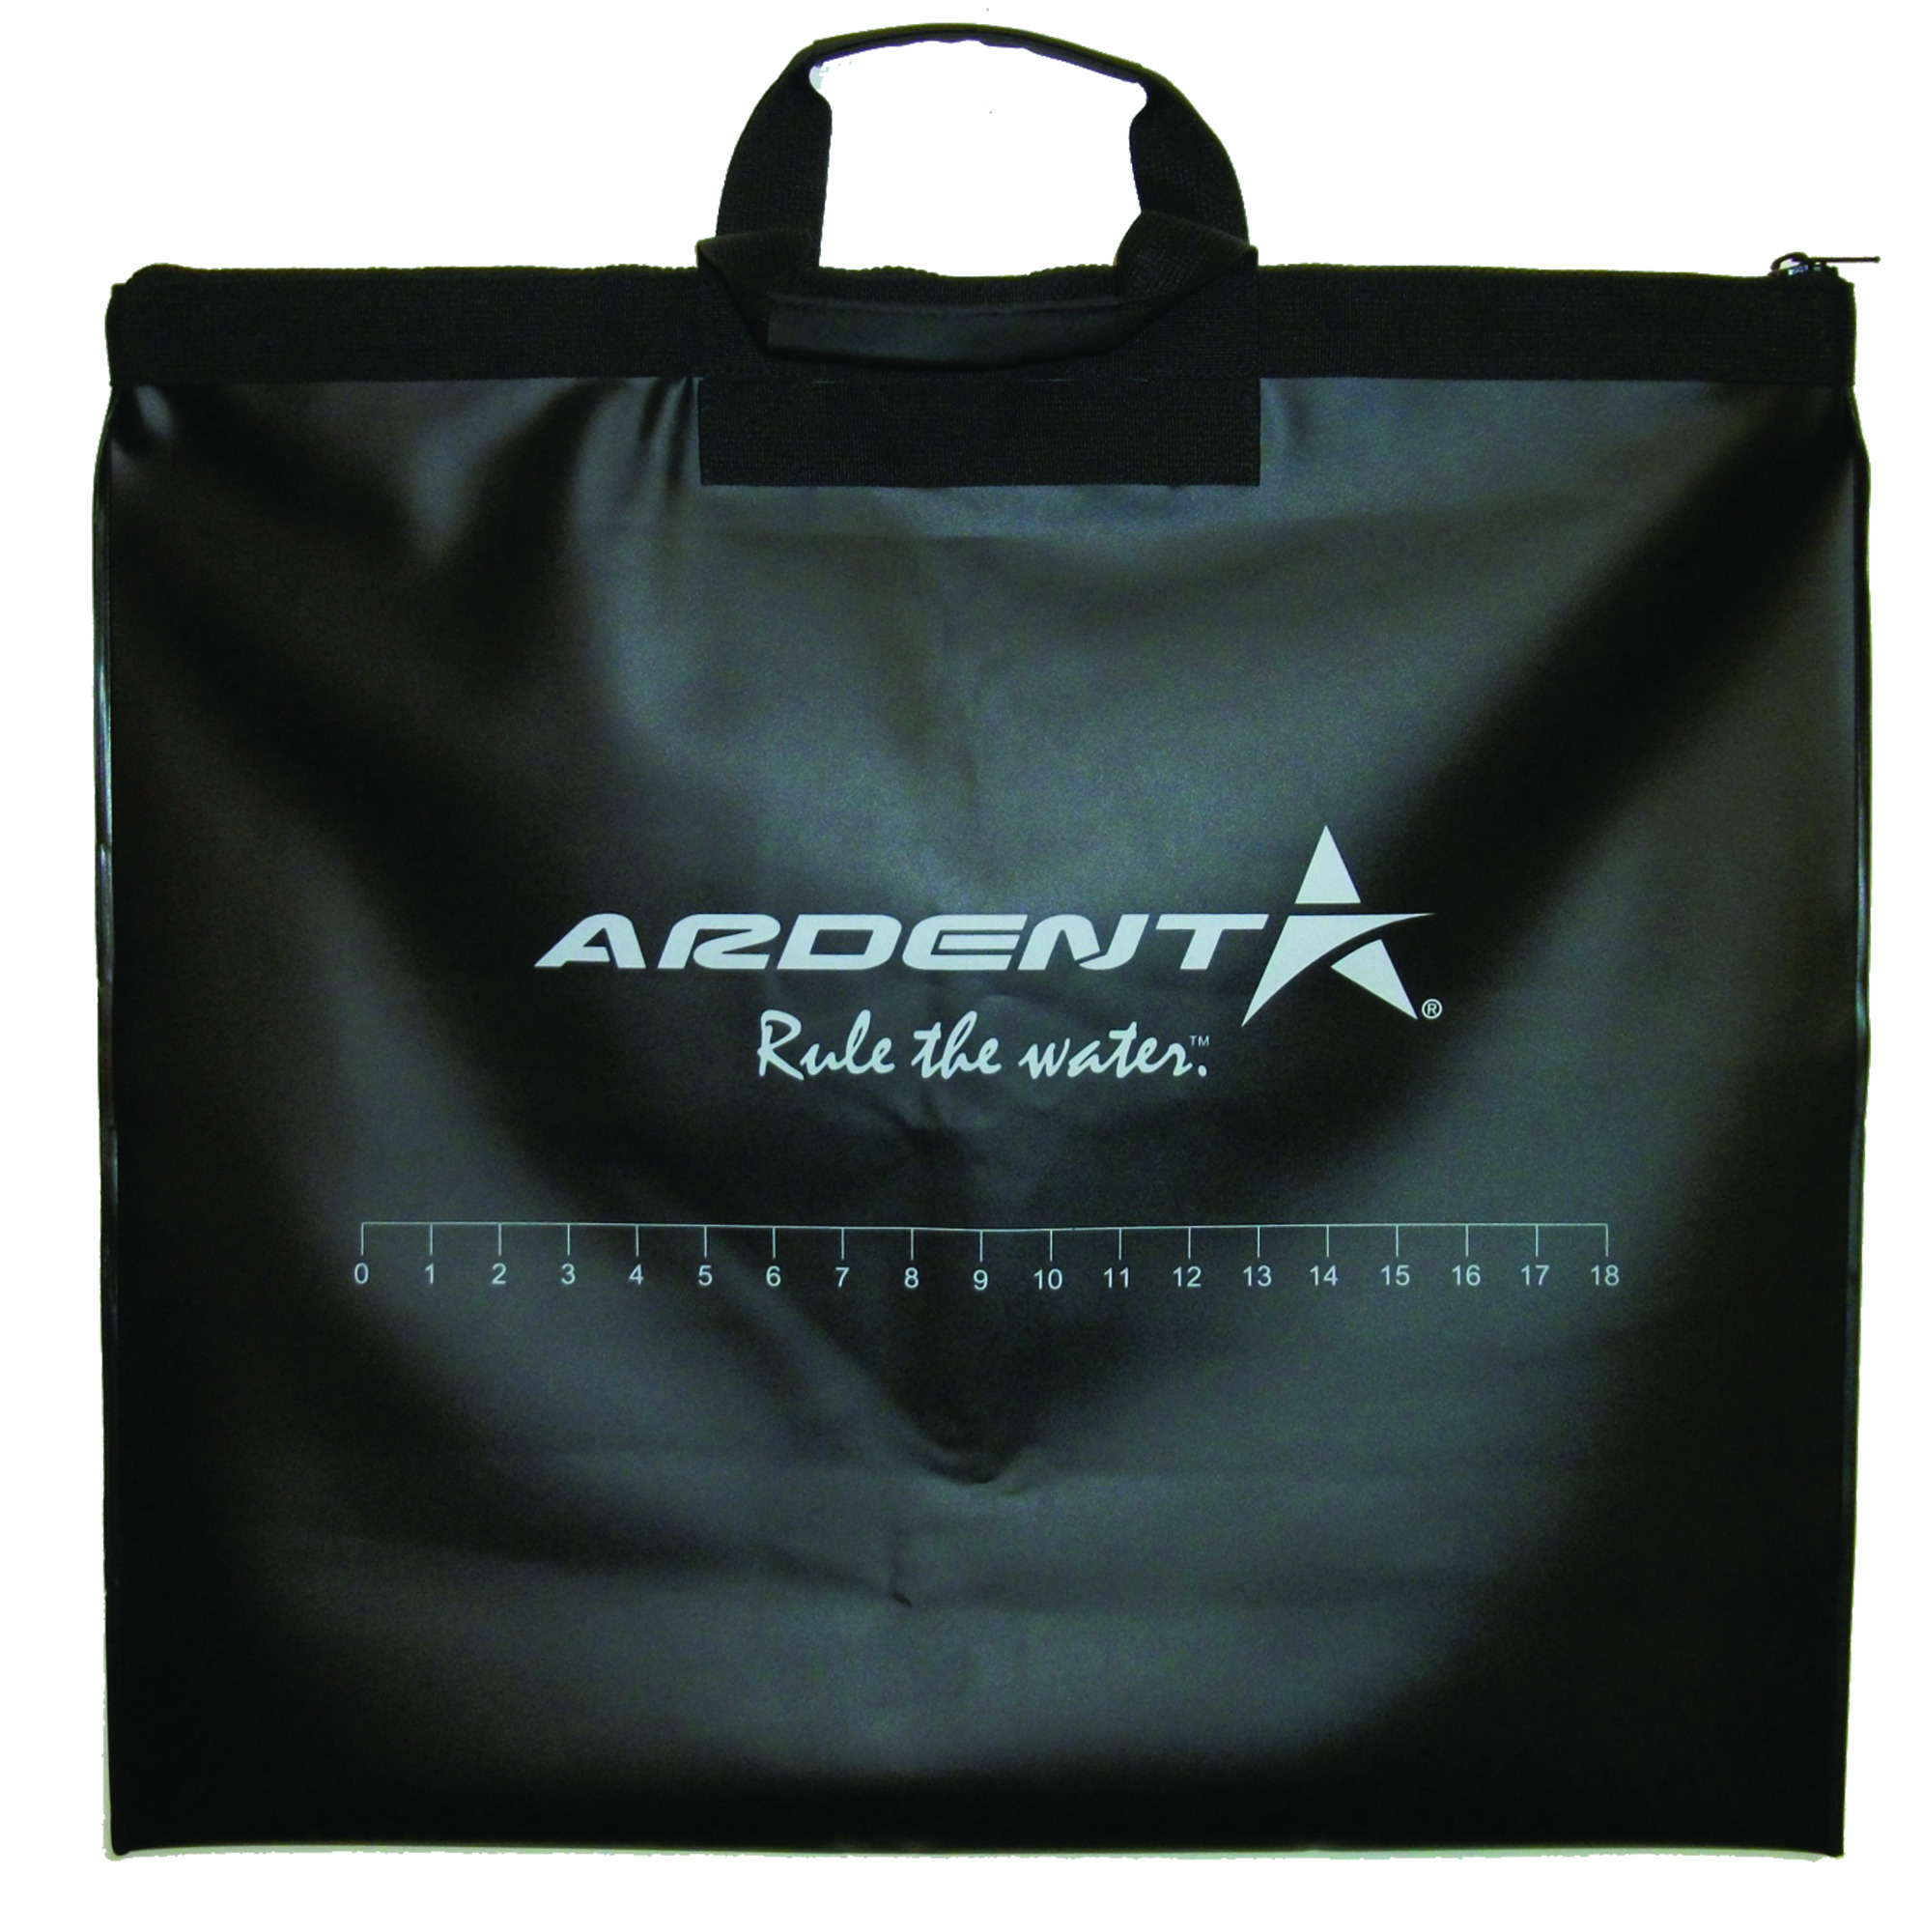 Ardent Weigh-In Bag  $4.00 Off Free Shipping over $49!